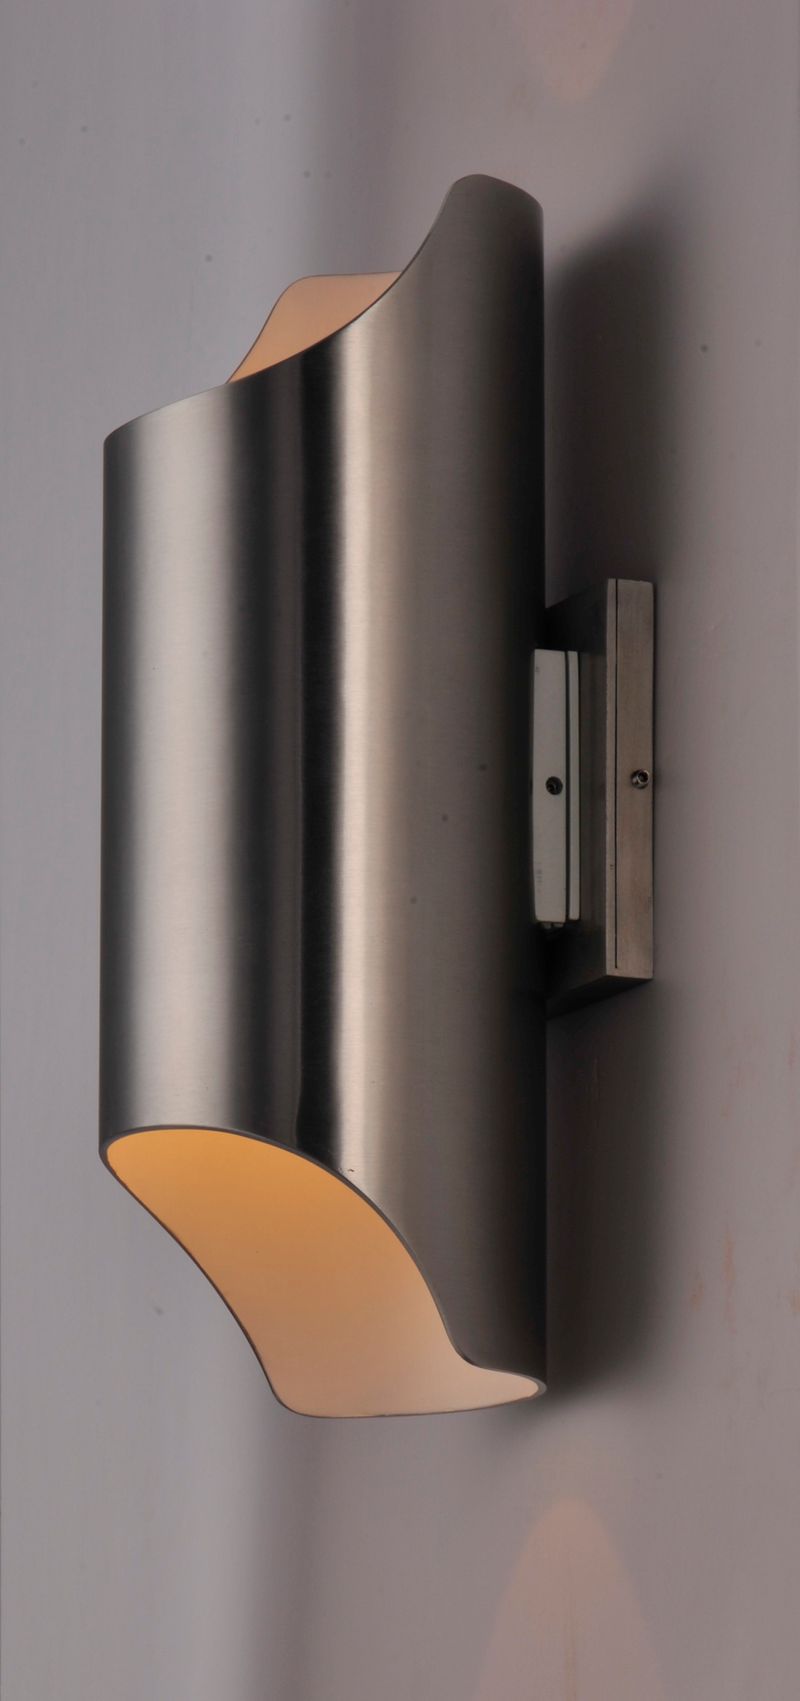 Lightray 5.75' 2 Light Outdoor Wall Sconce in Brushed Aluminum